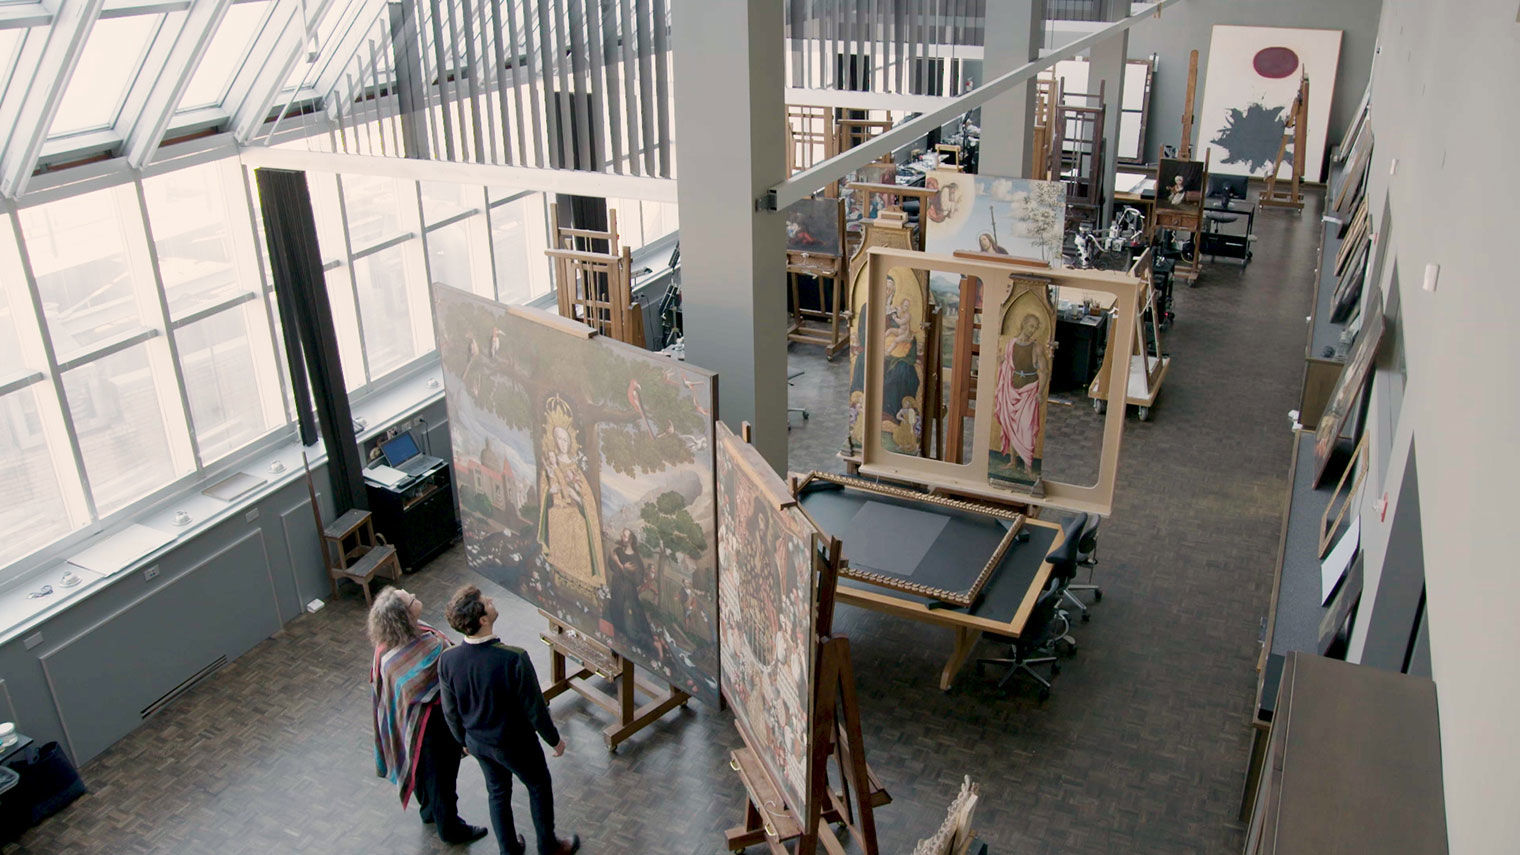 An overhead view of a tall, pitched ceiling room illuminated by a floor-to-ceiling wall of windows and skylights. People work on paintings at several easels placed perpendicularly to the wall of windows.